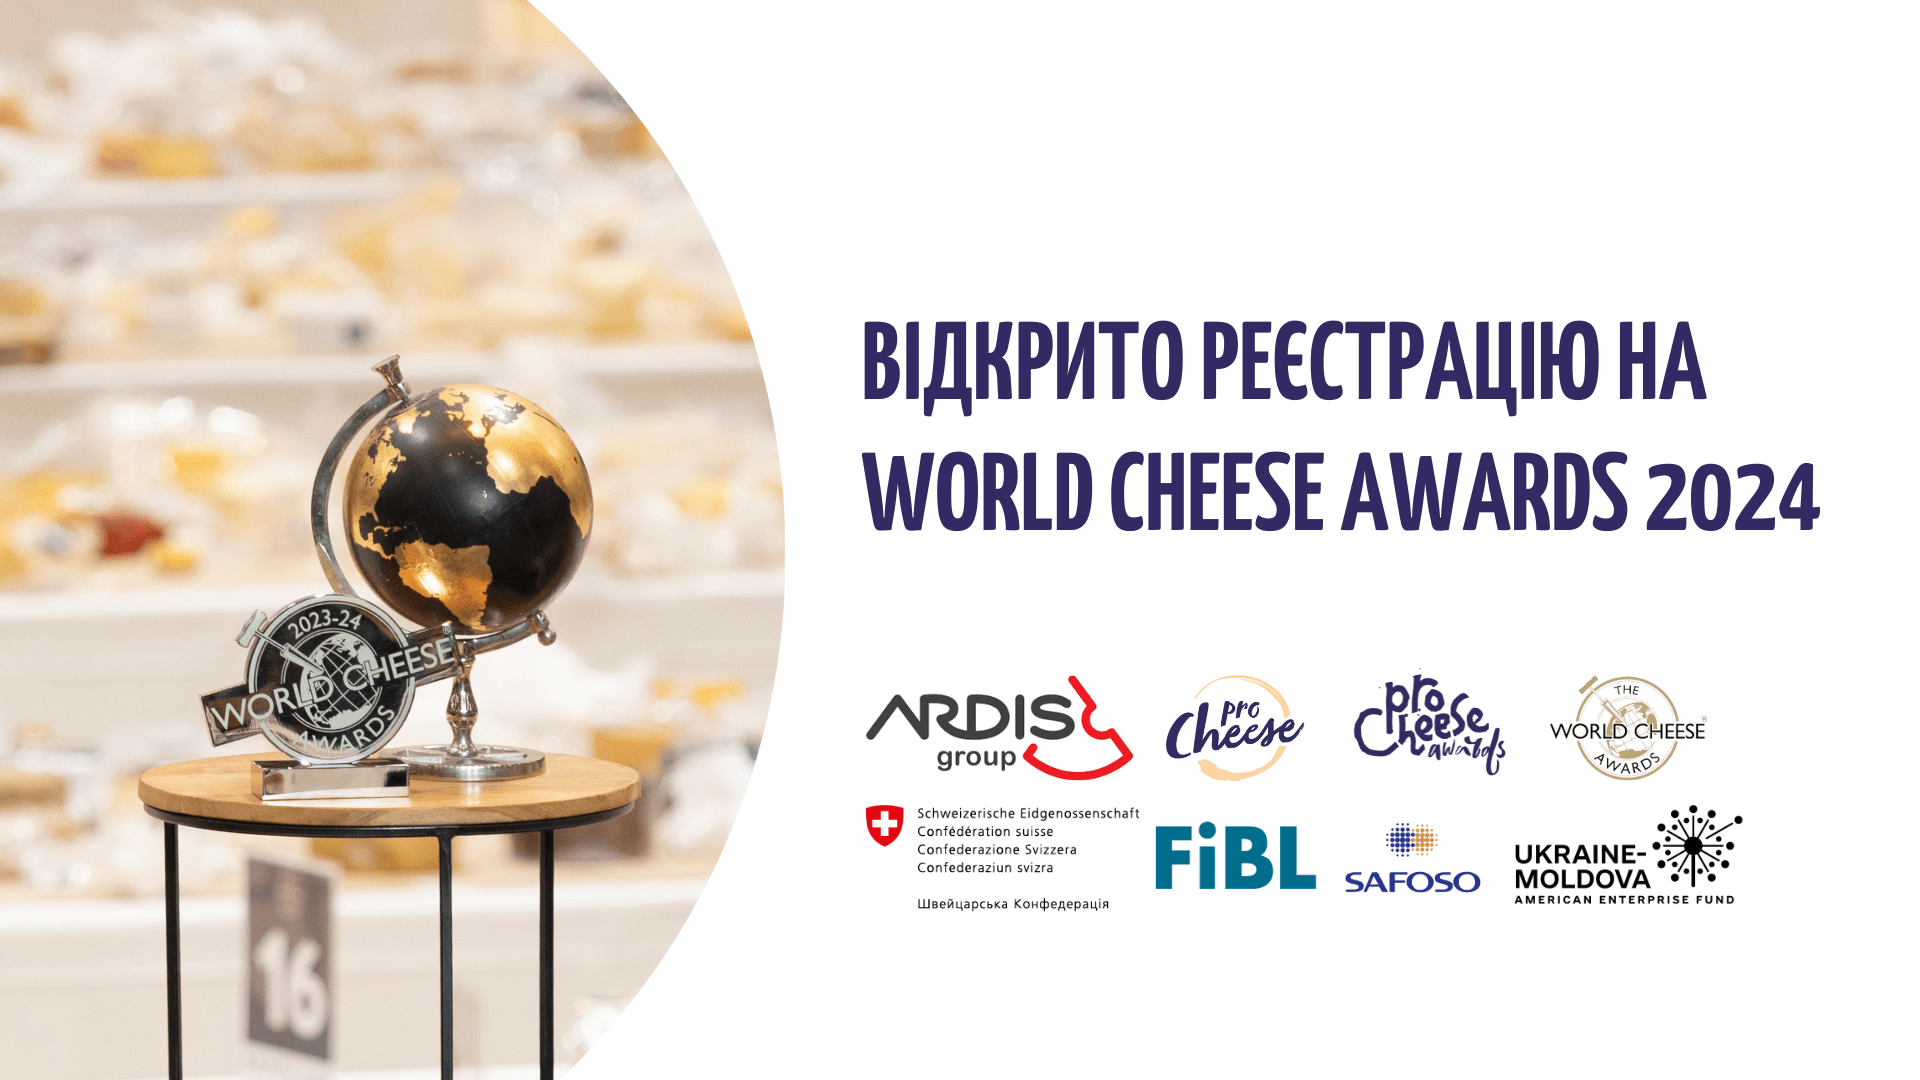 World Cheese Awards 2024: Call for Applications image